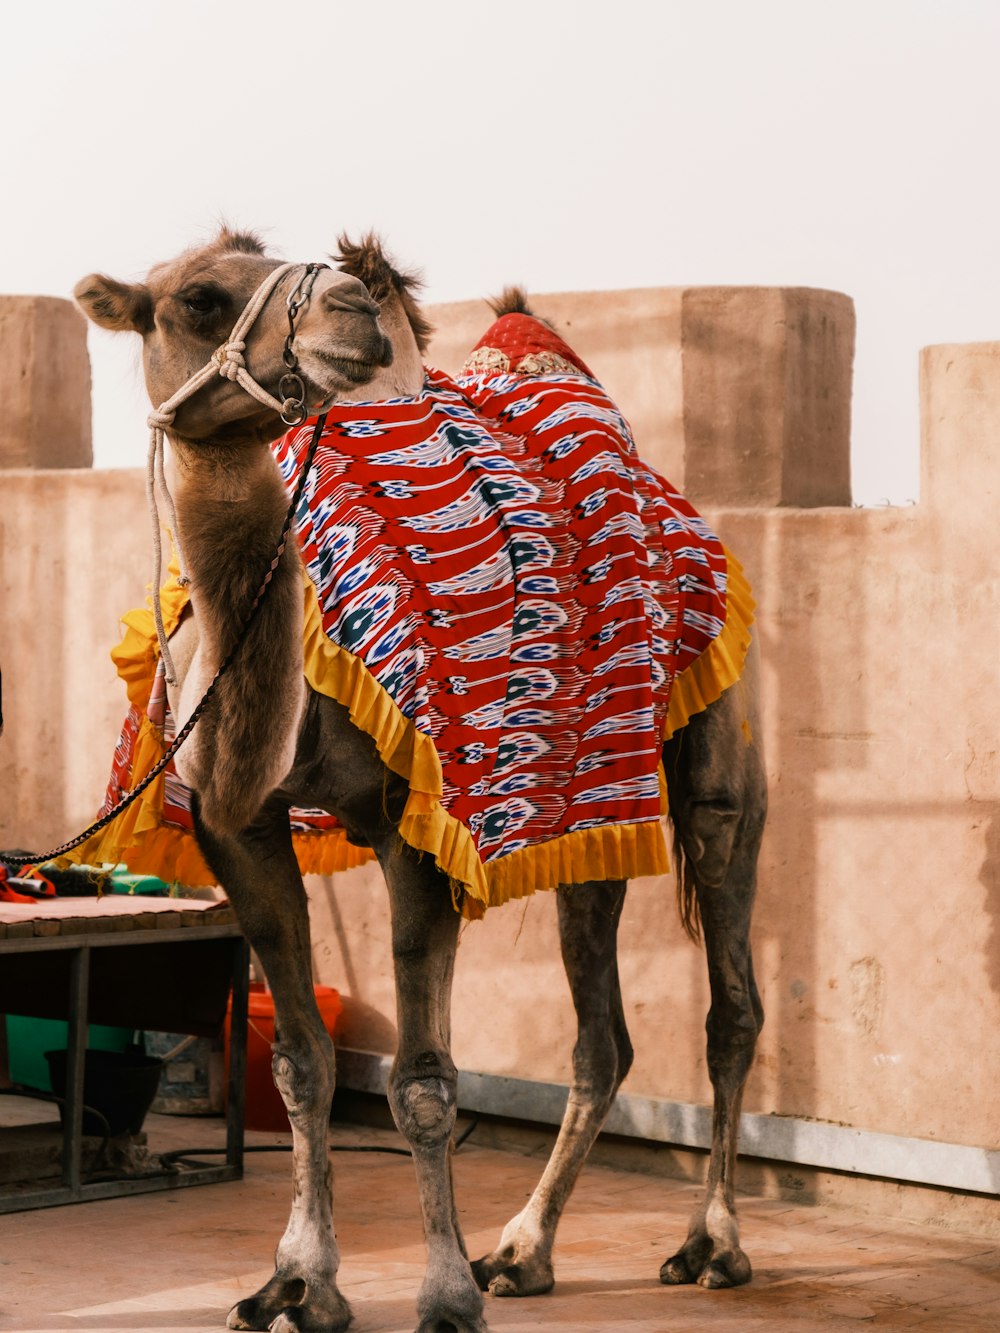 A camel wearing a red and blue blanket photo – Free China Image on Unsplash